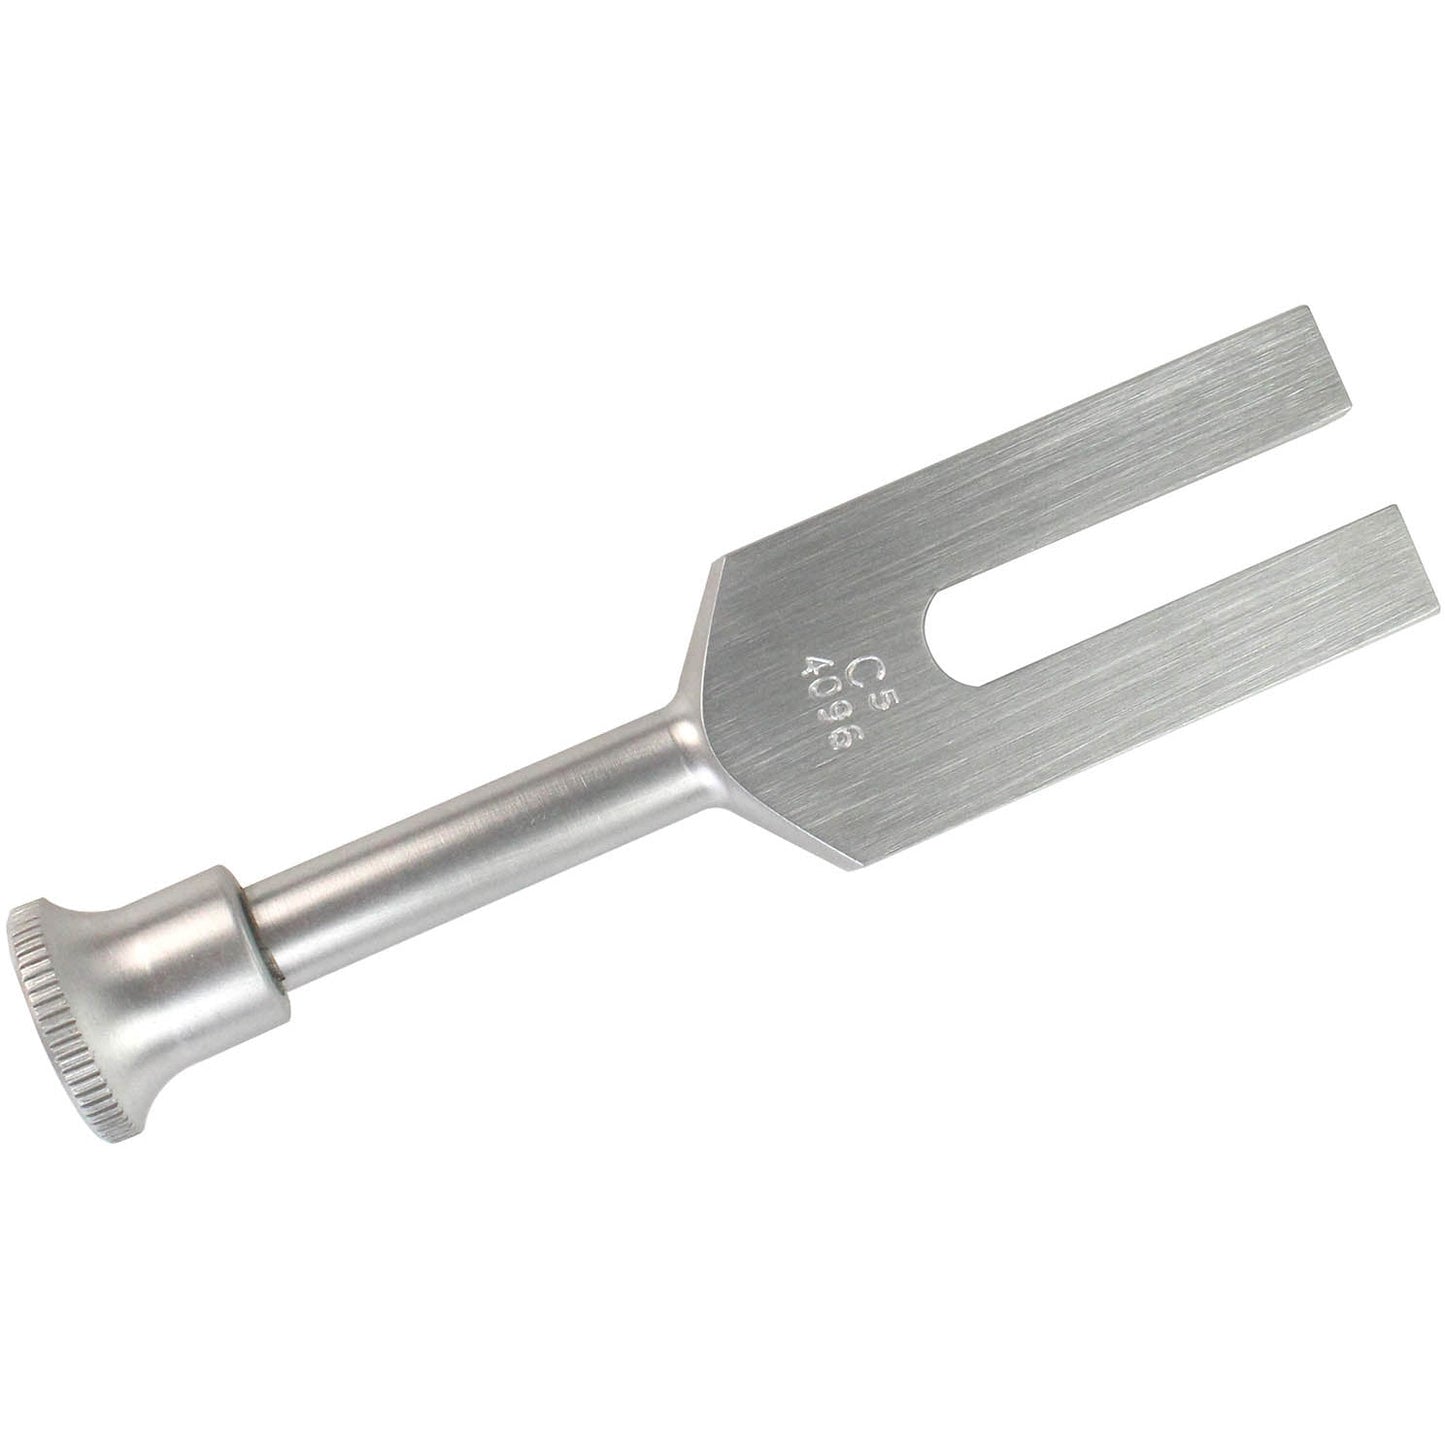 Aluminium Alloy Tuning Fork without Foot - C5 4096hz